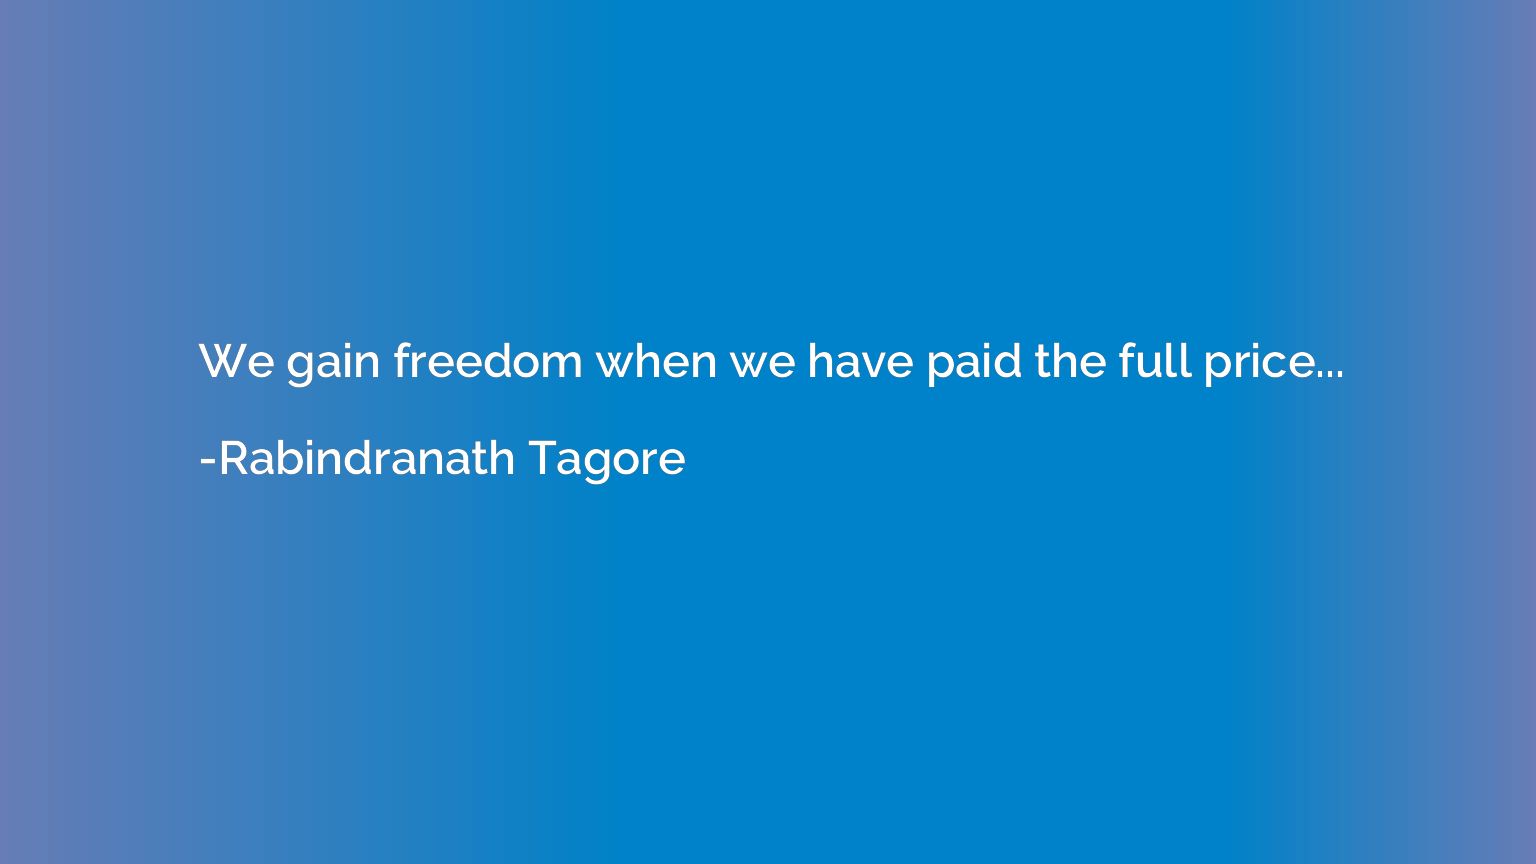 We gain freedom when we have paid the full price...